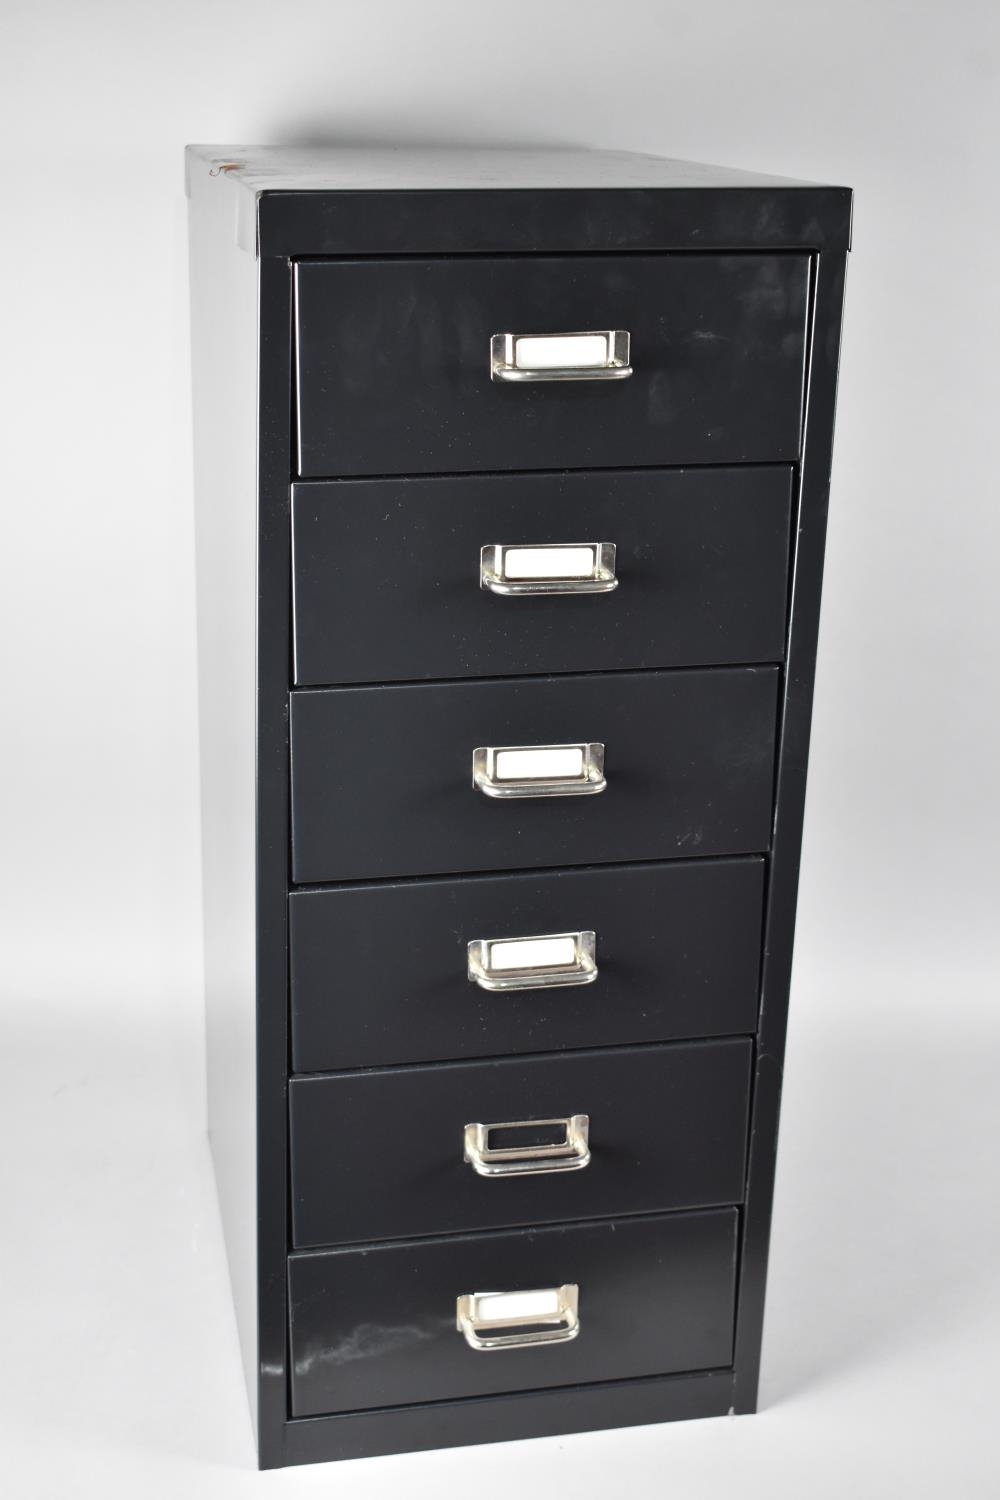 A Modern Six Drawer Metal Chest by United Office, 28cms Wide and 67cms High